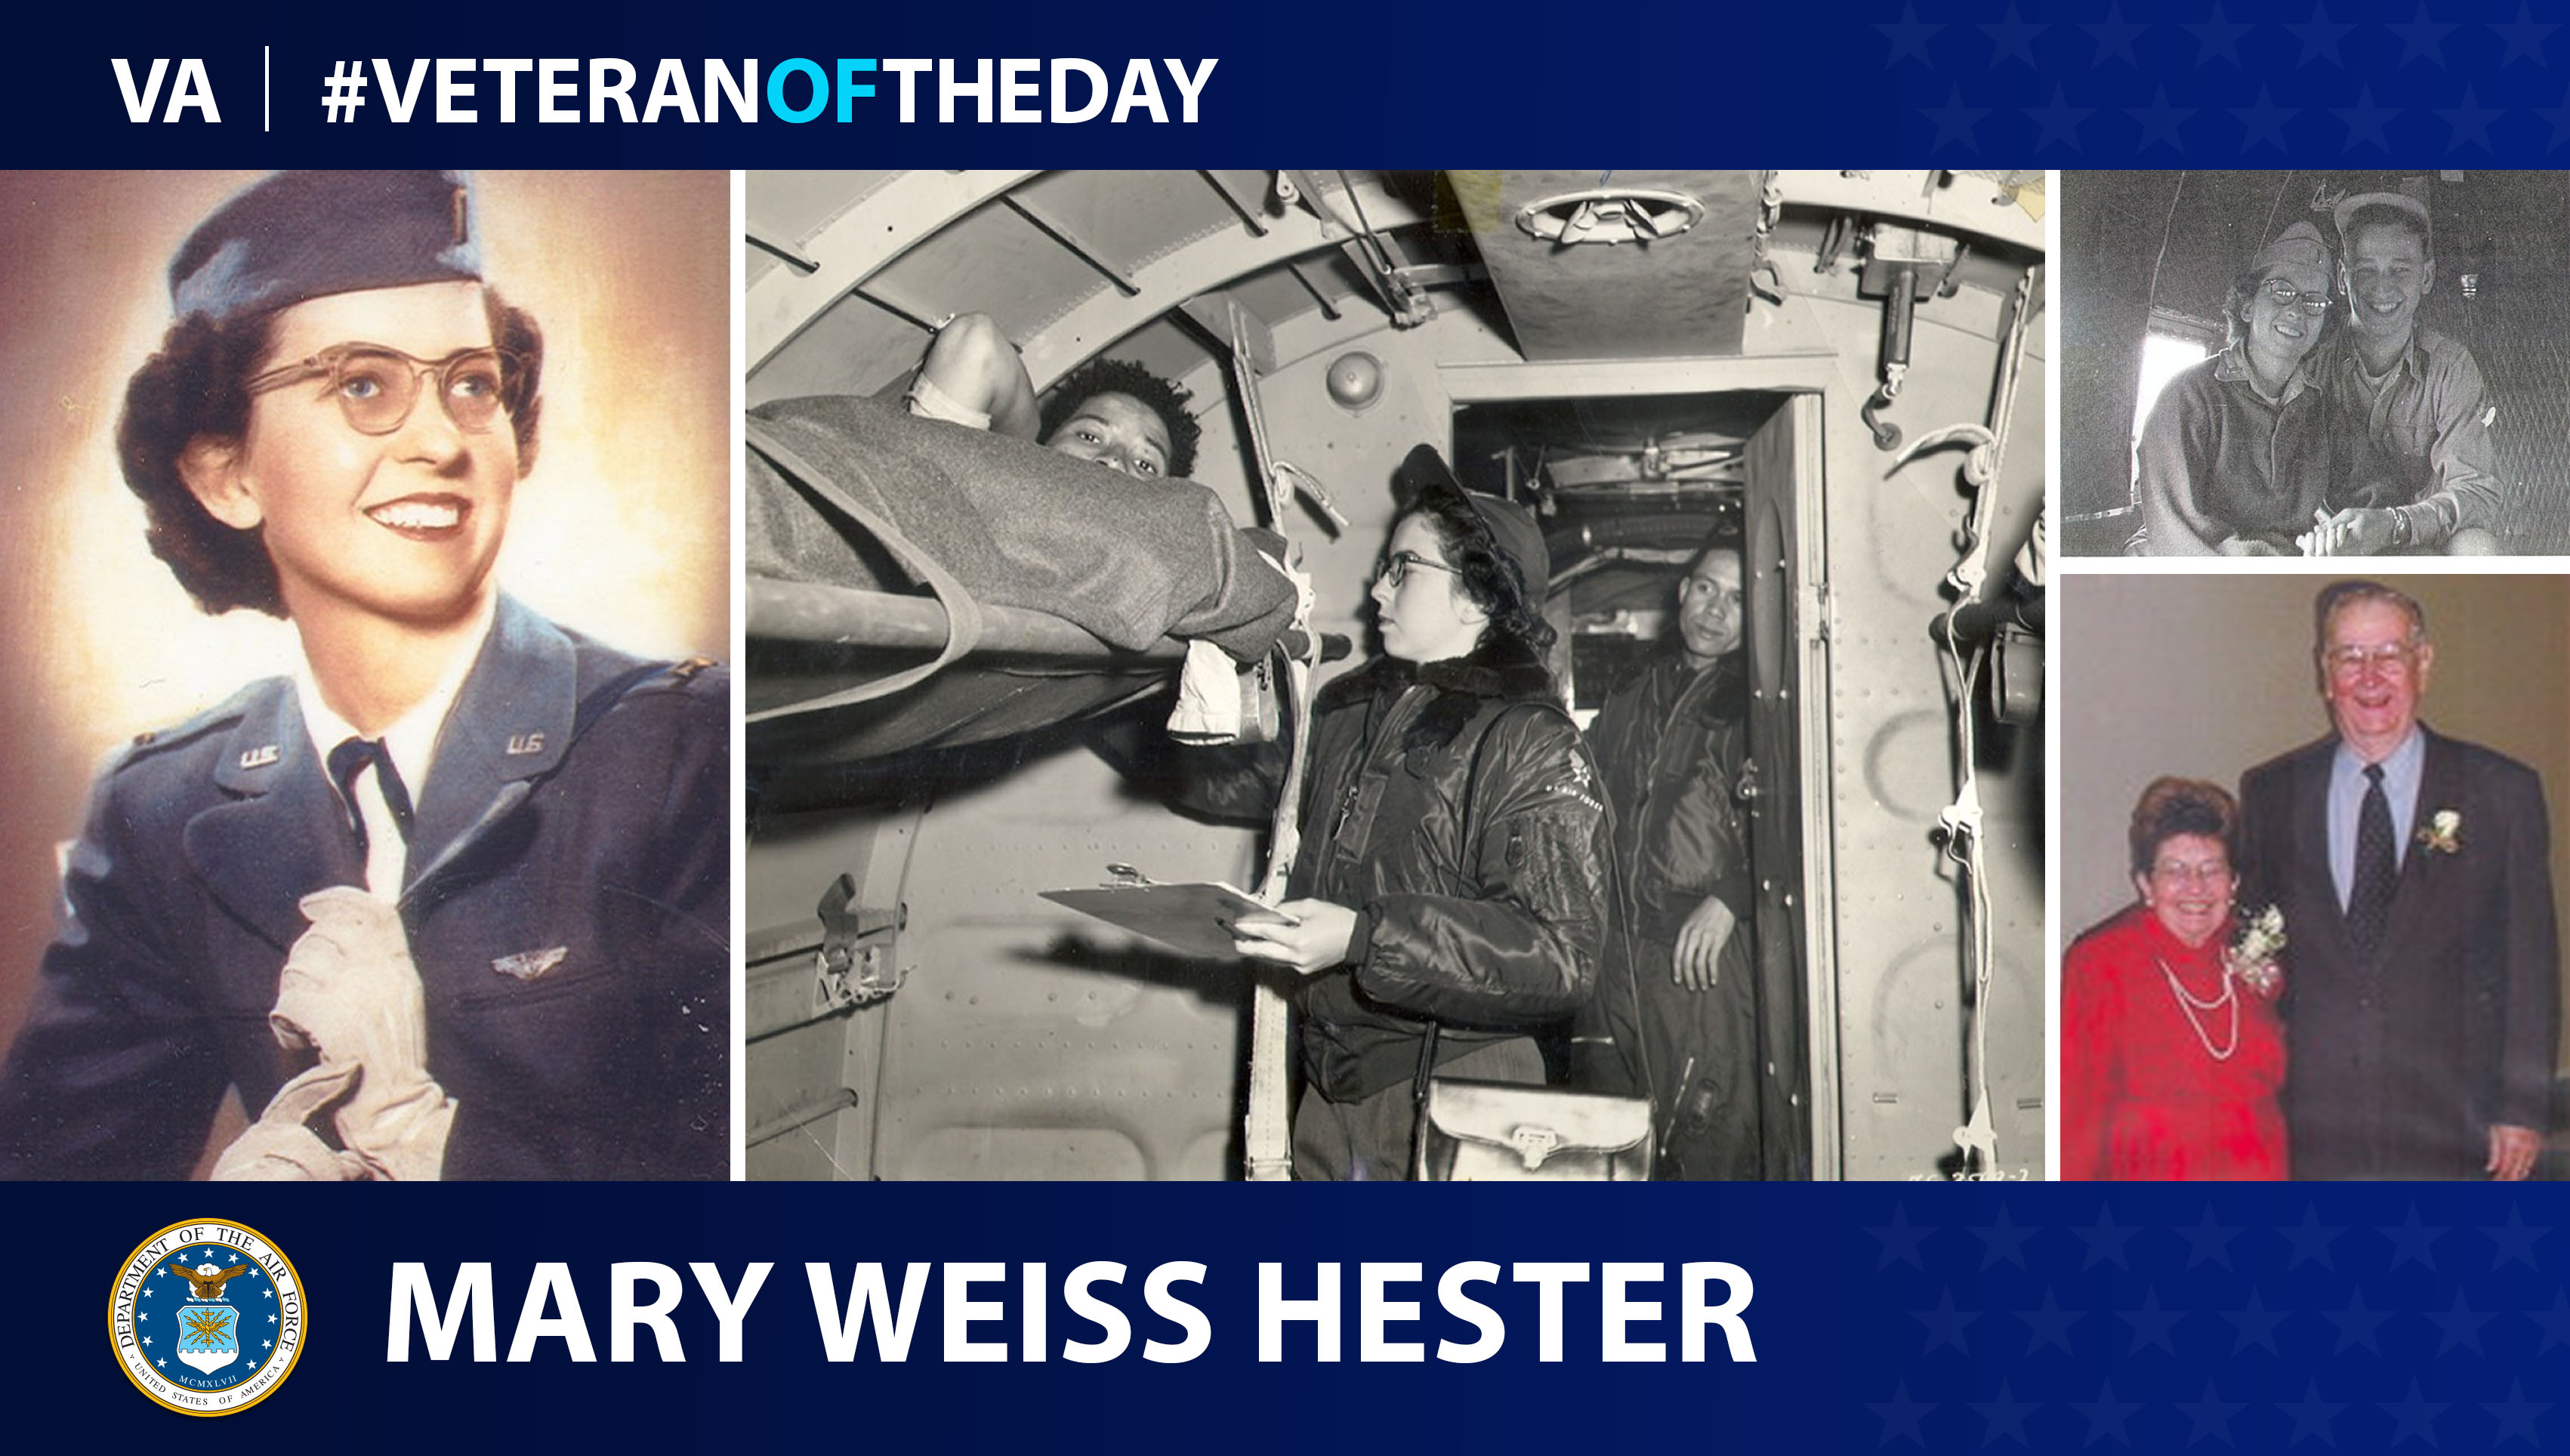 Air Force Veteran Mary Weiss Hester is today's Veteran of the Day.